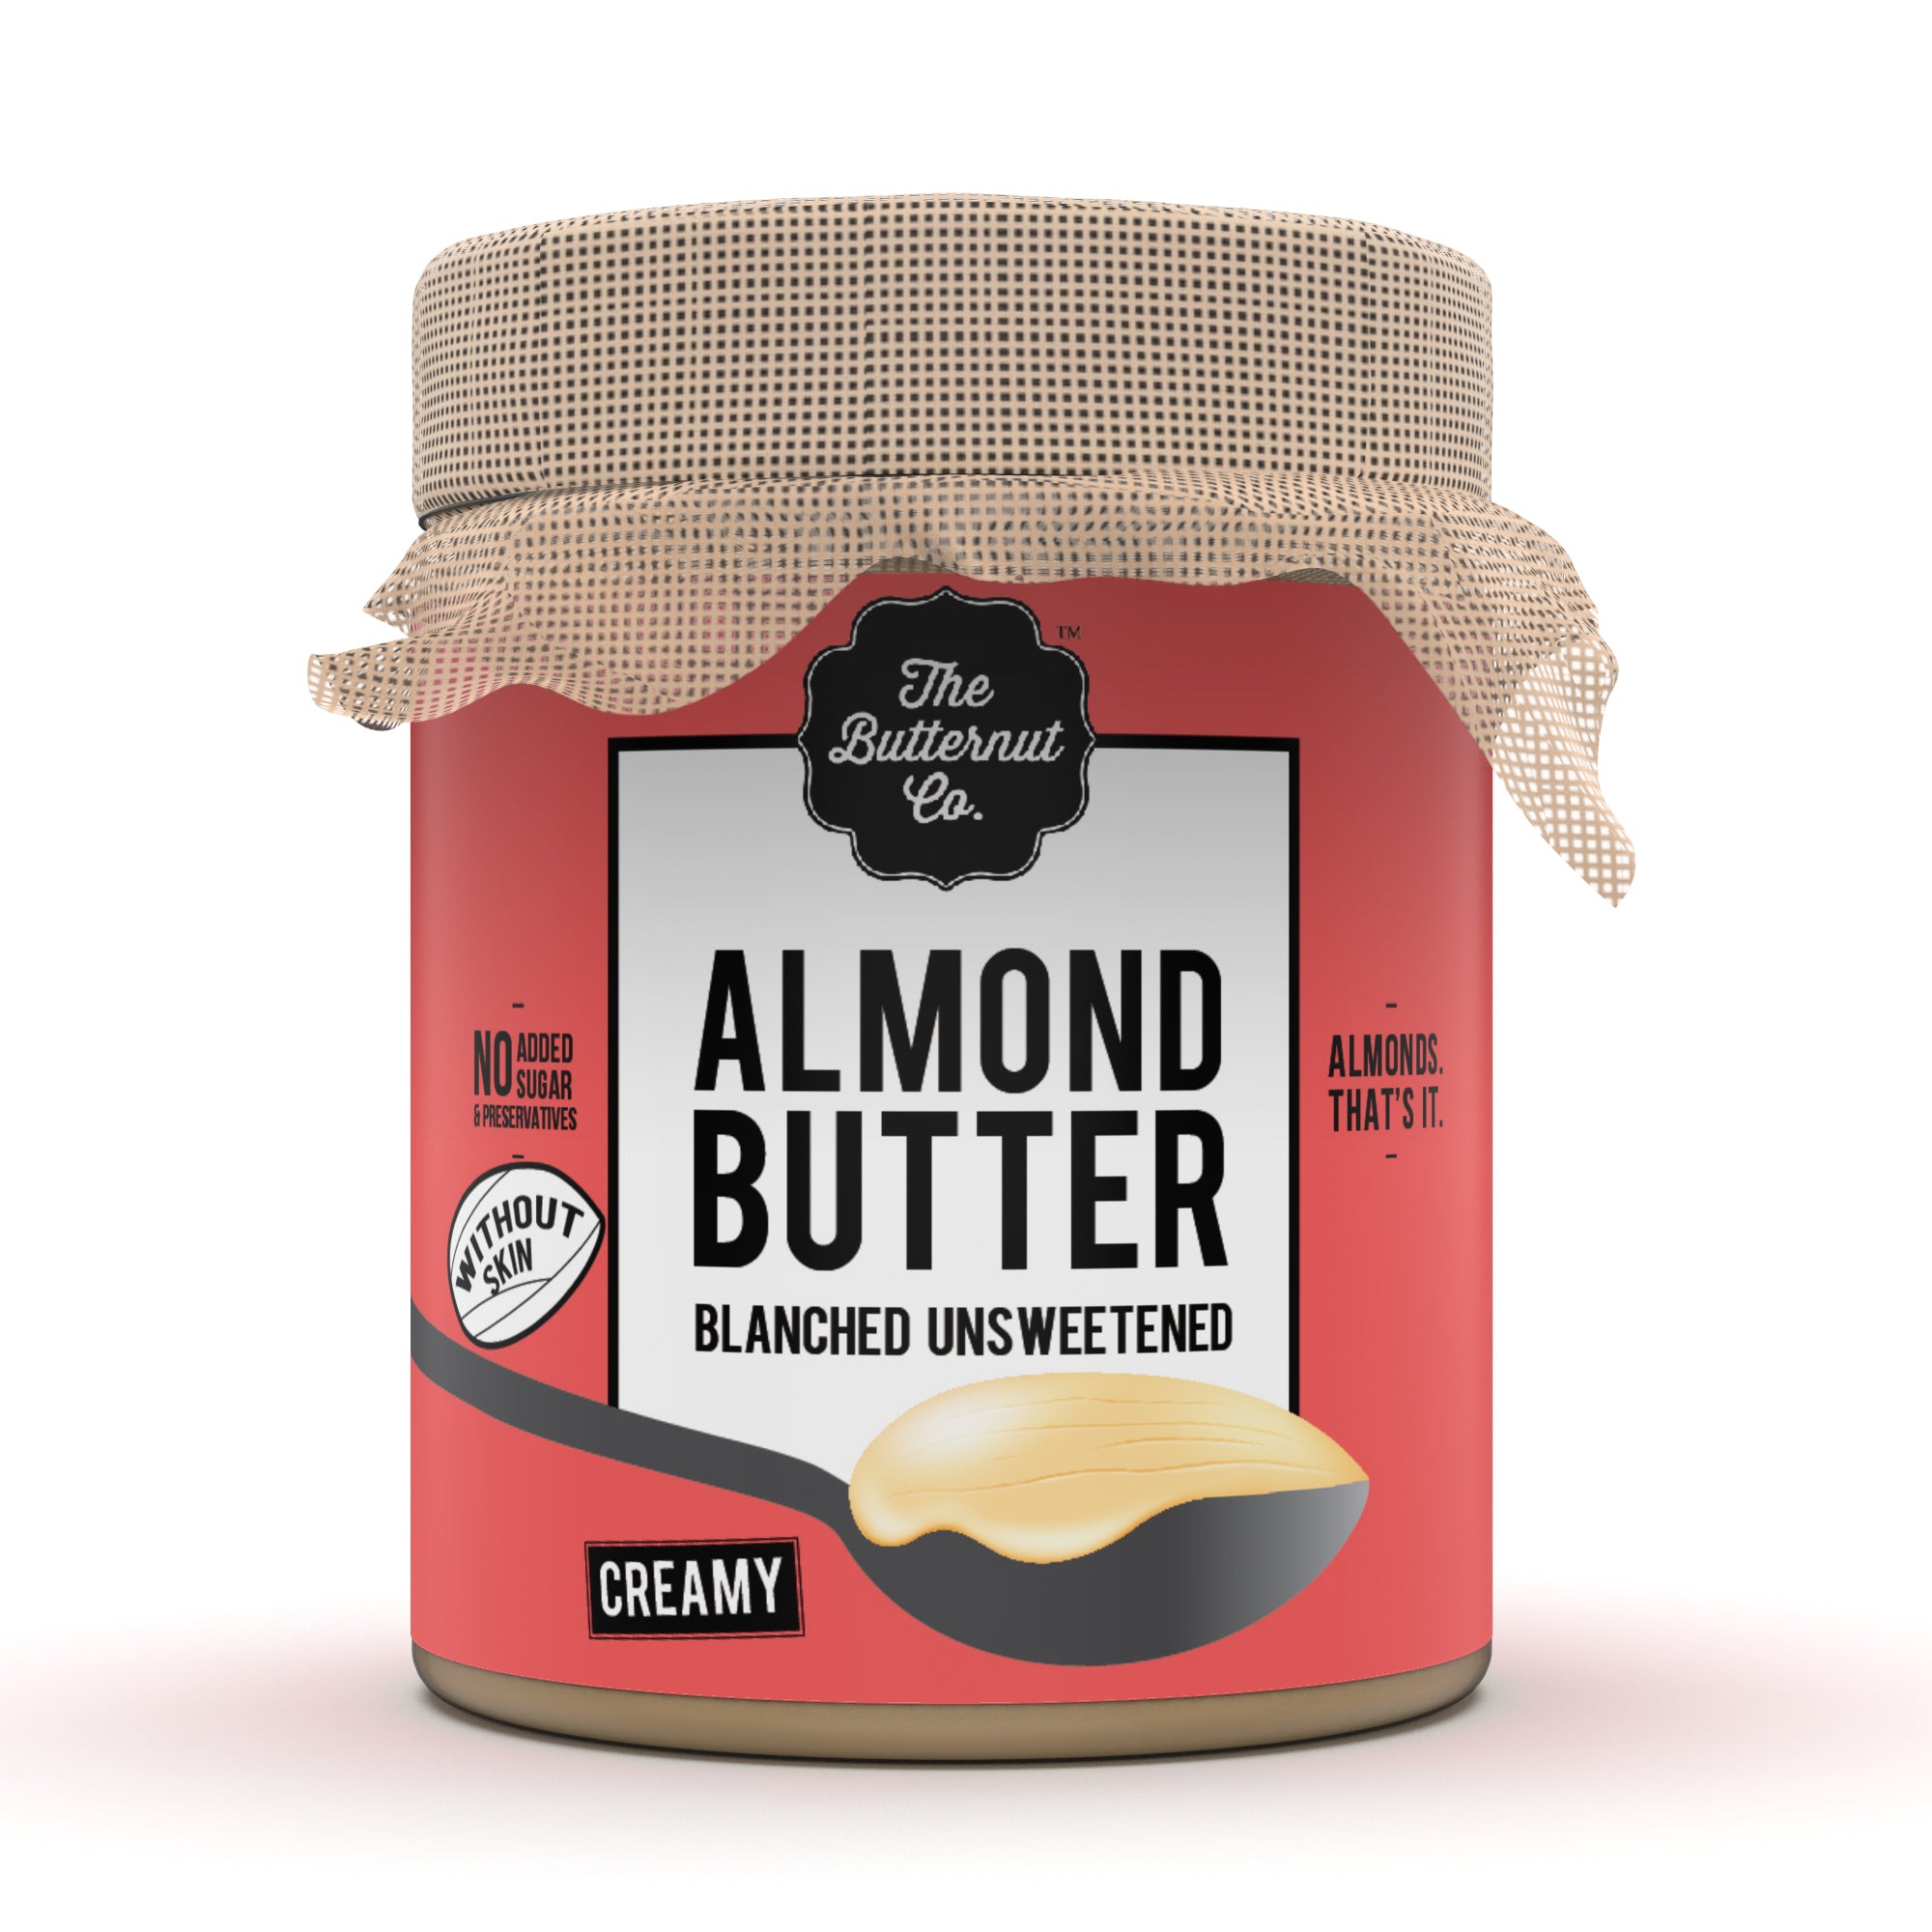 The Butternut Co. Blanched Unsweetened Almond Butter Creamy 200 gms